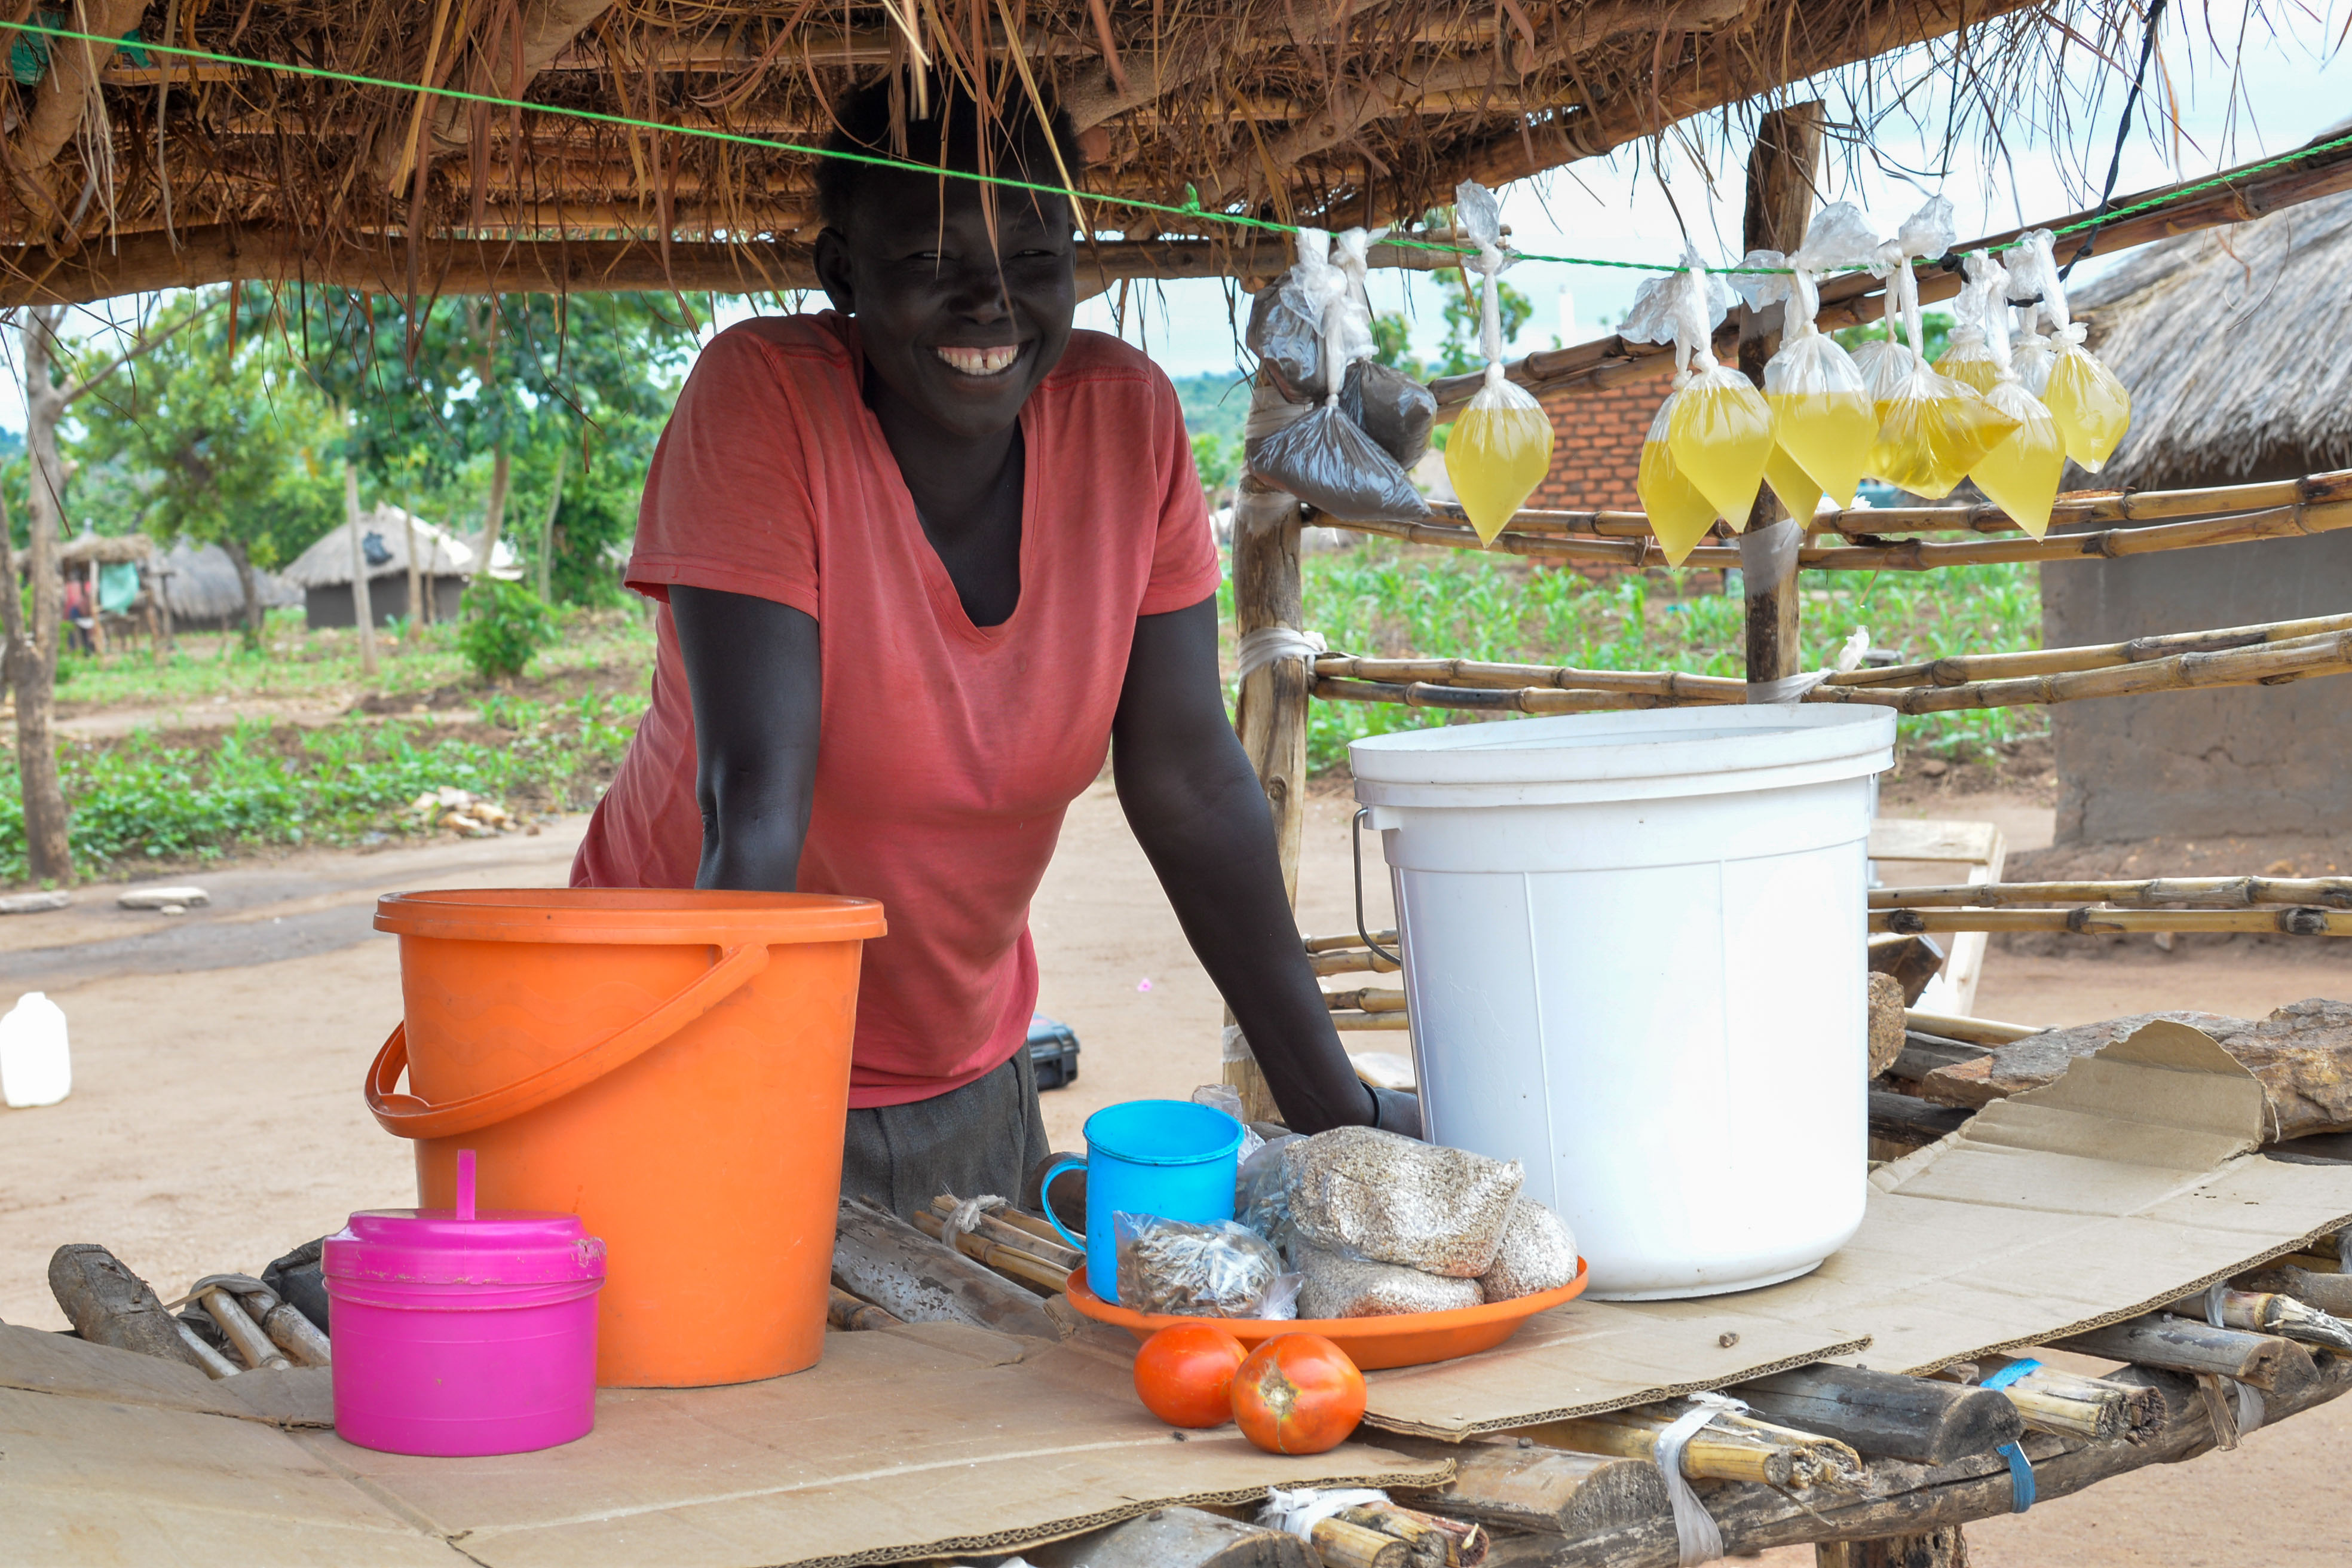 Agness joined a World Vision savings group and she can now afford extra food for her family